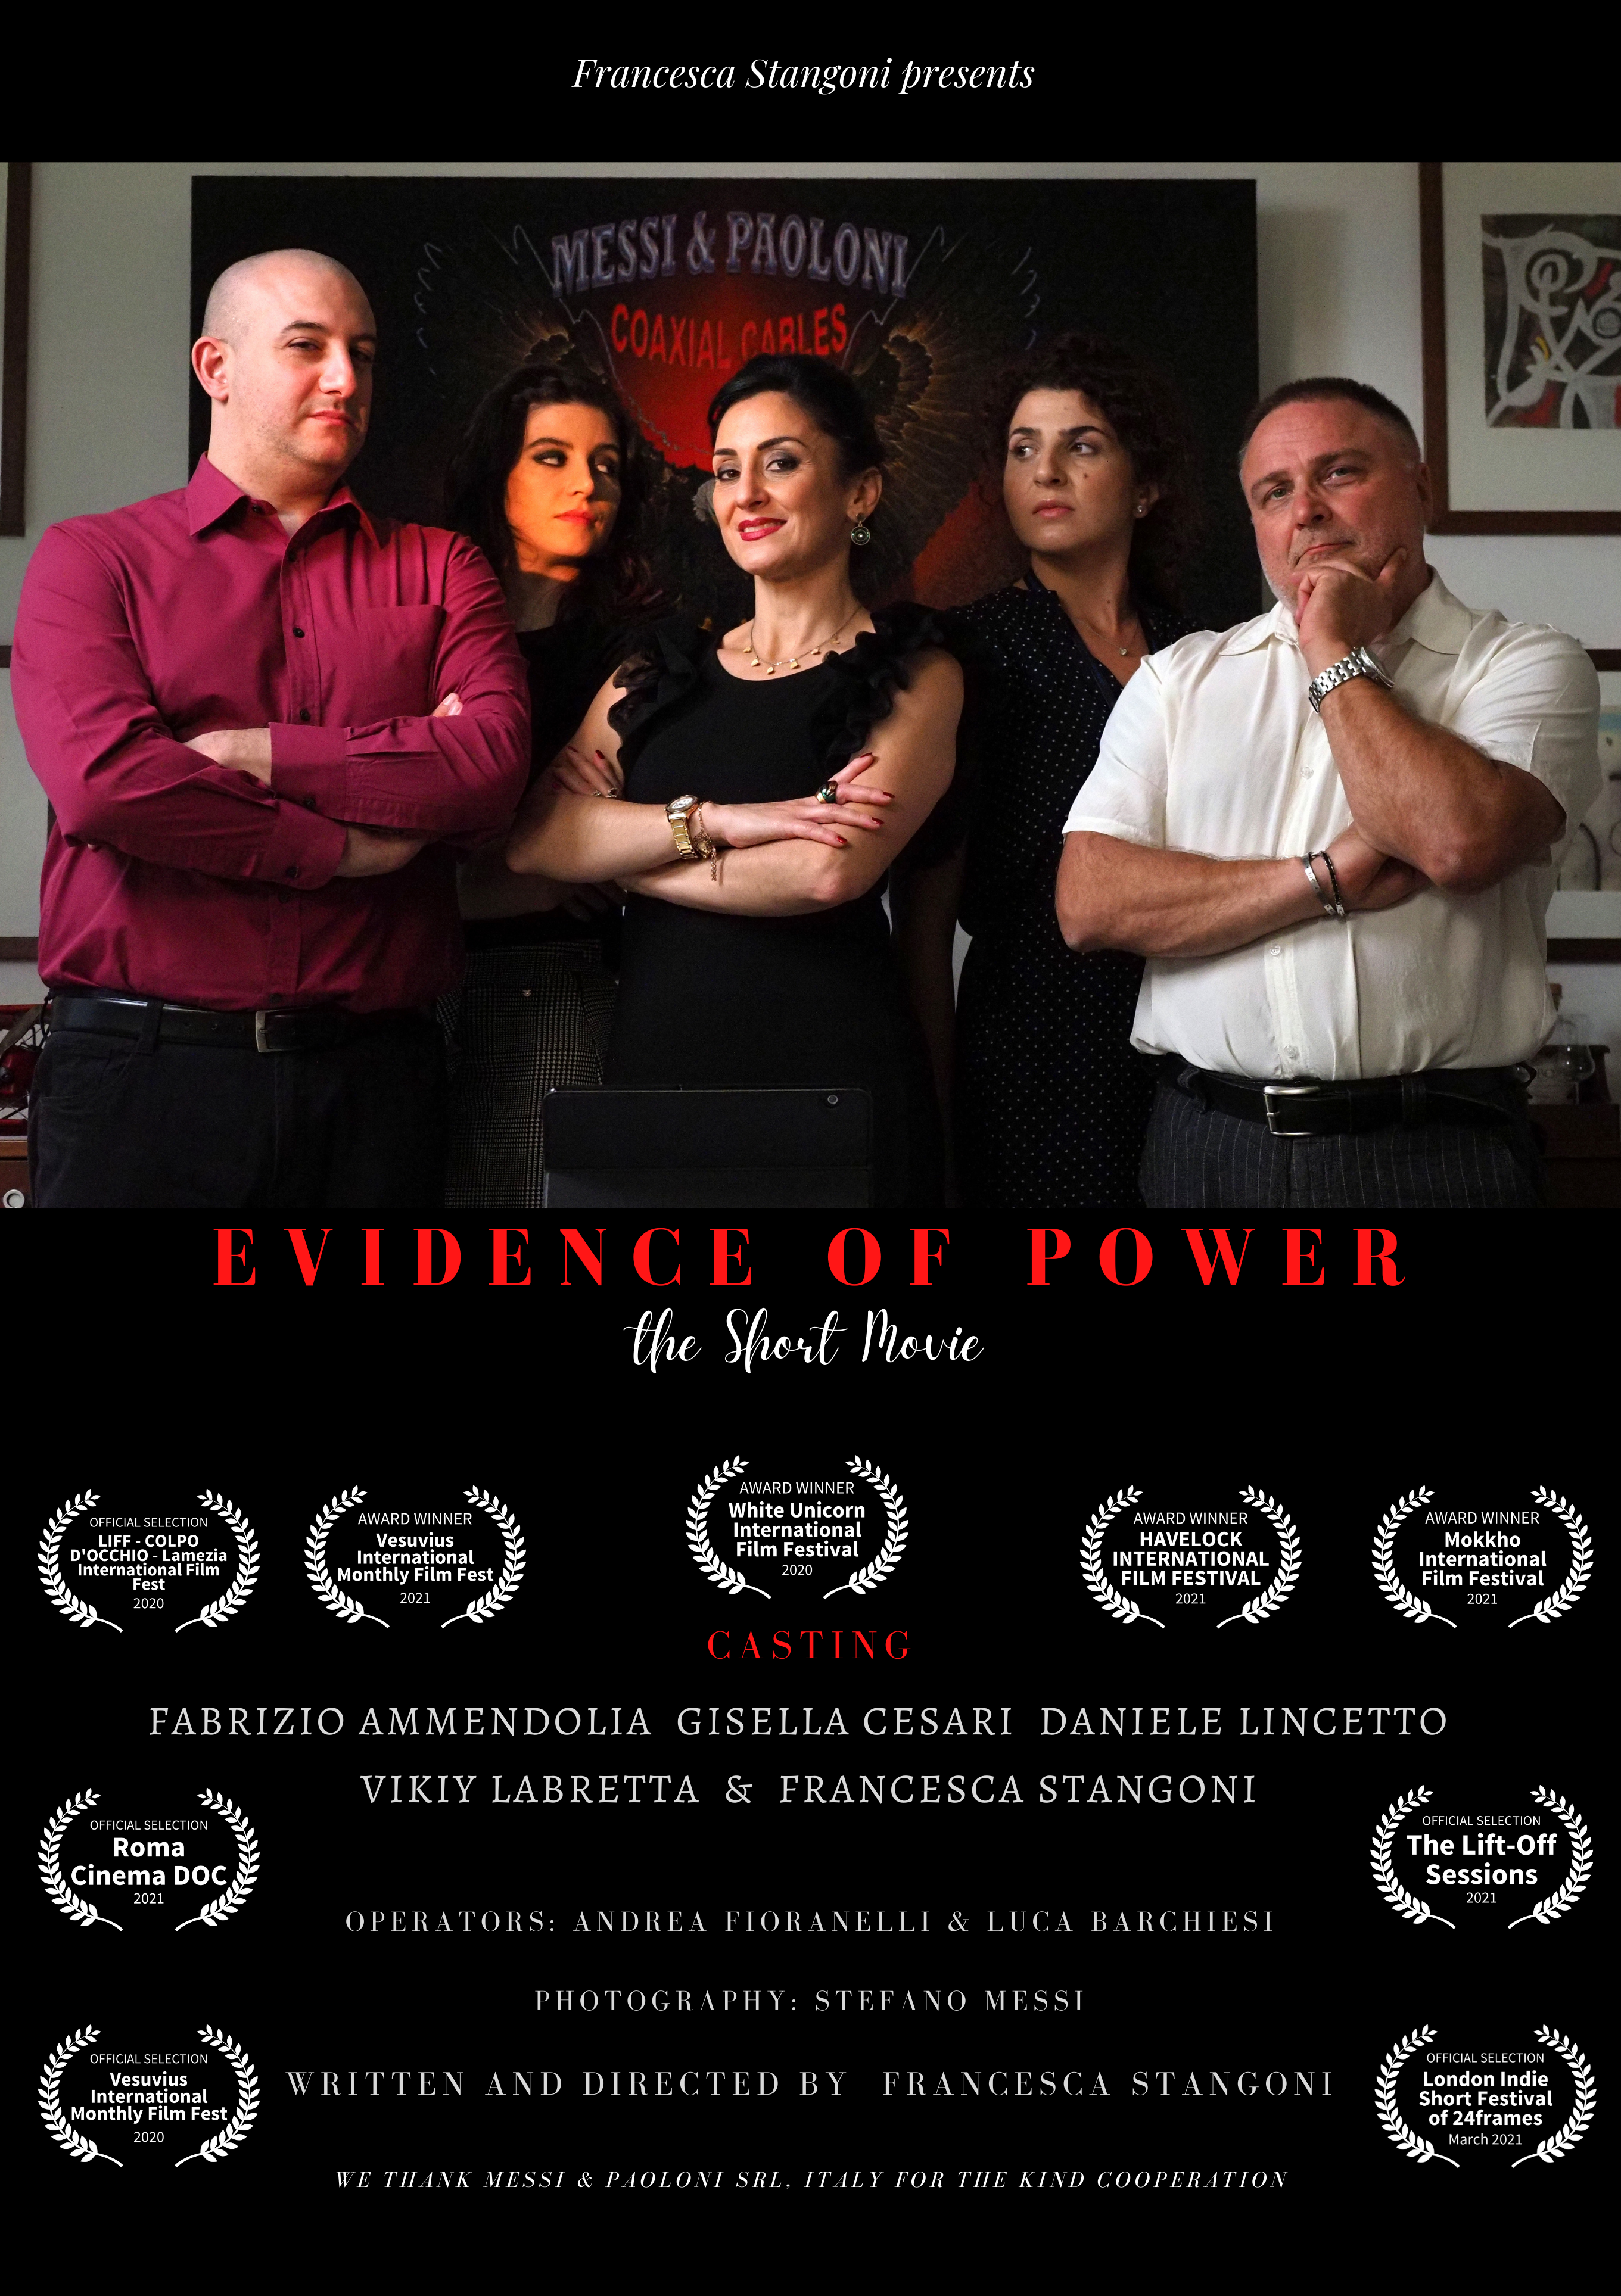 PROVE DI POTERE - EVIDENCE OF POWER